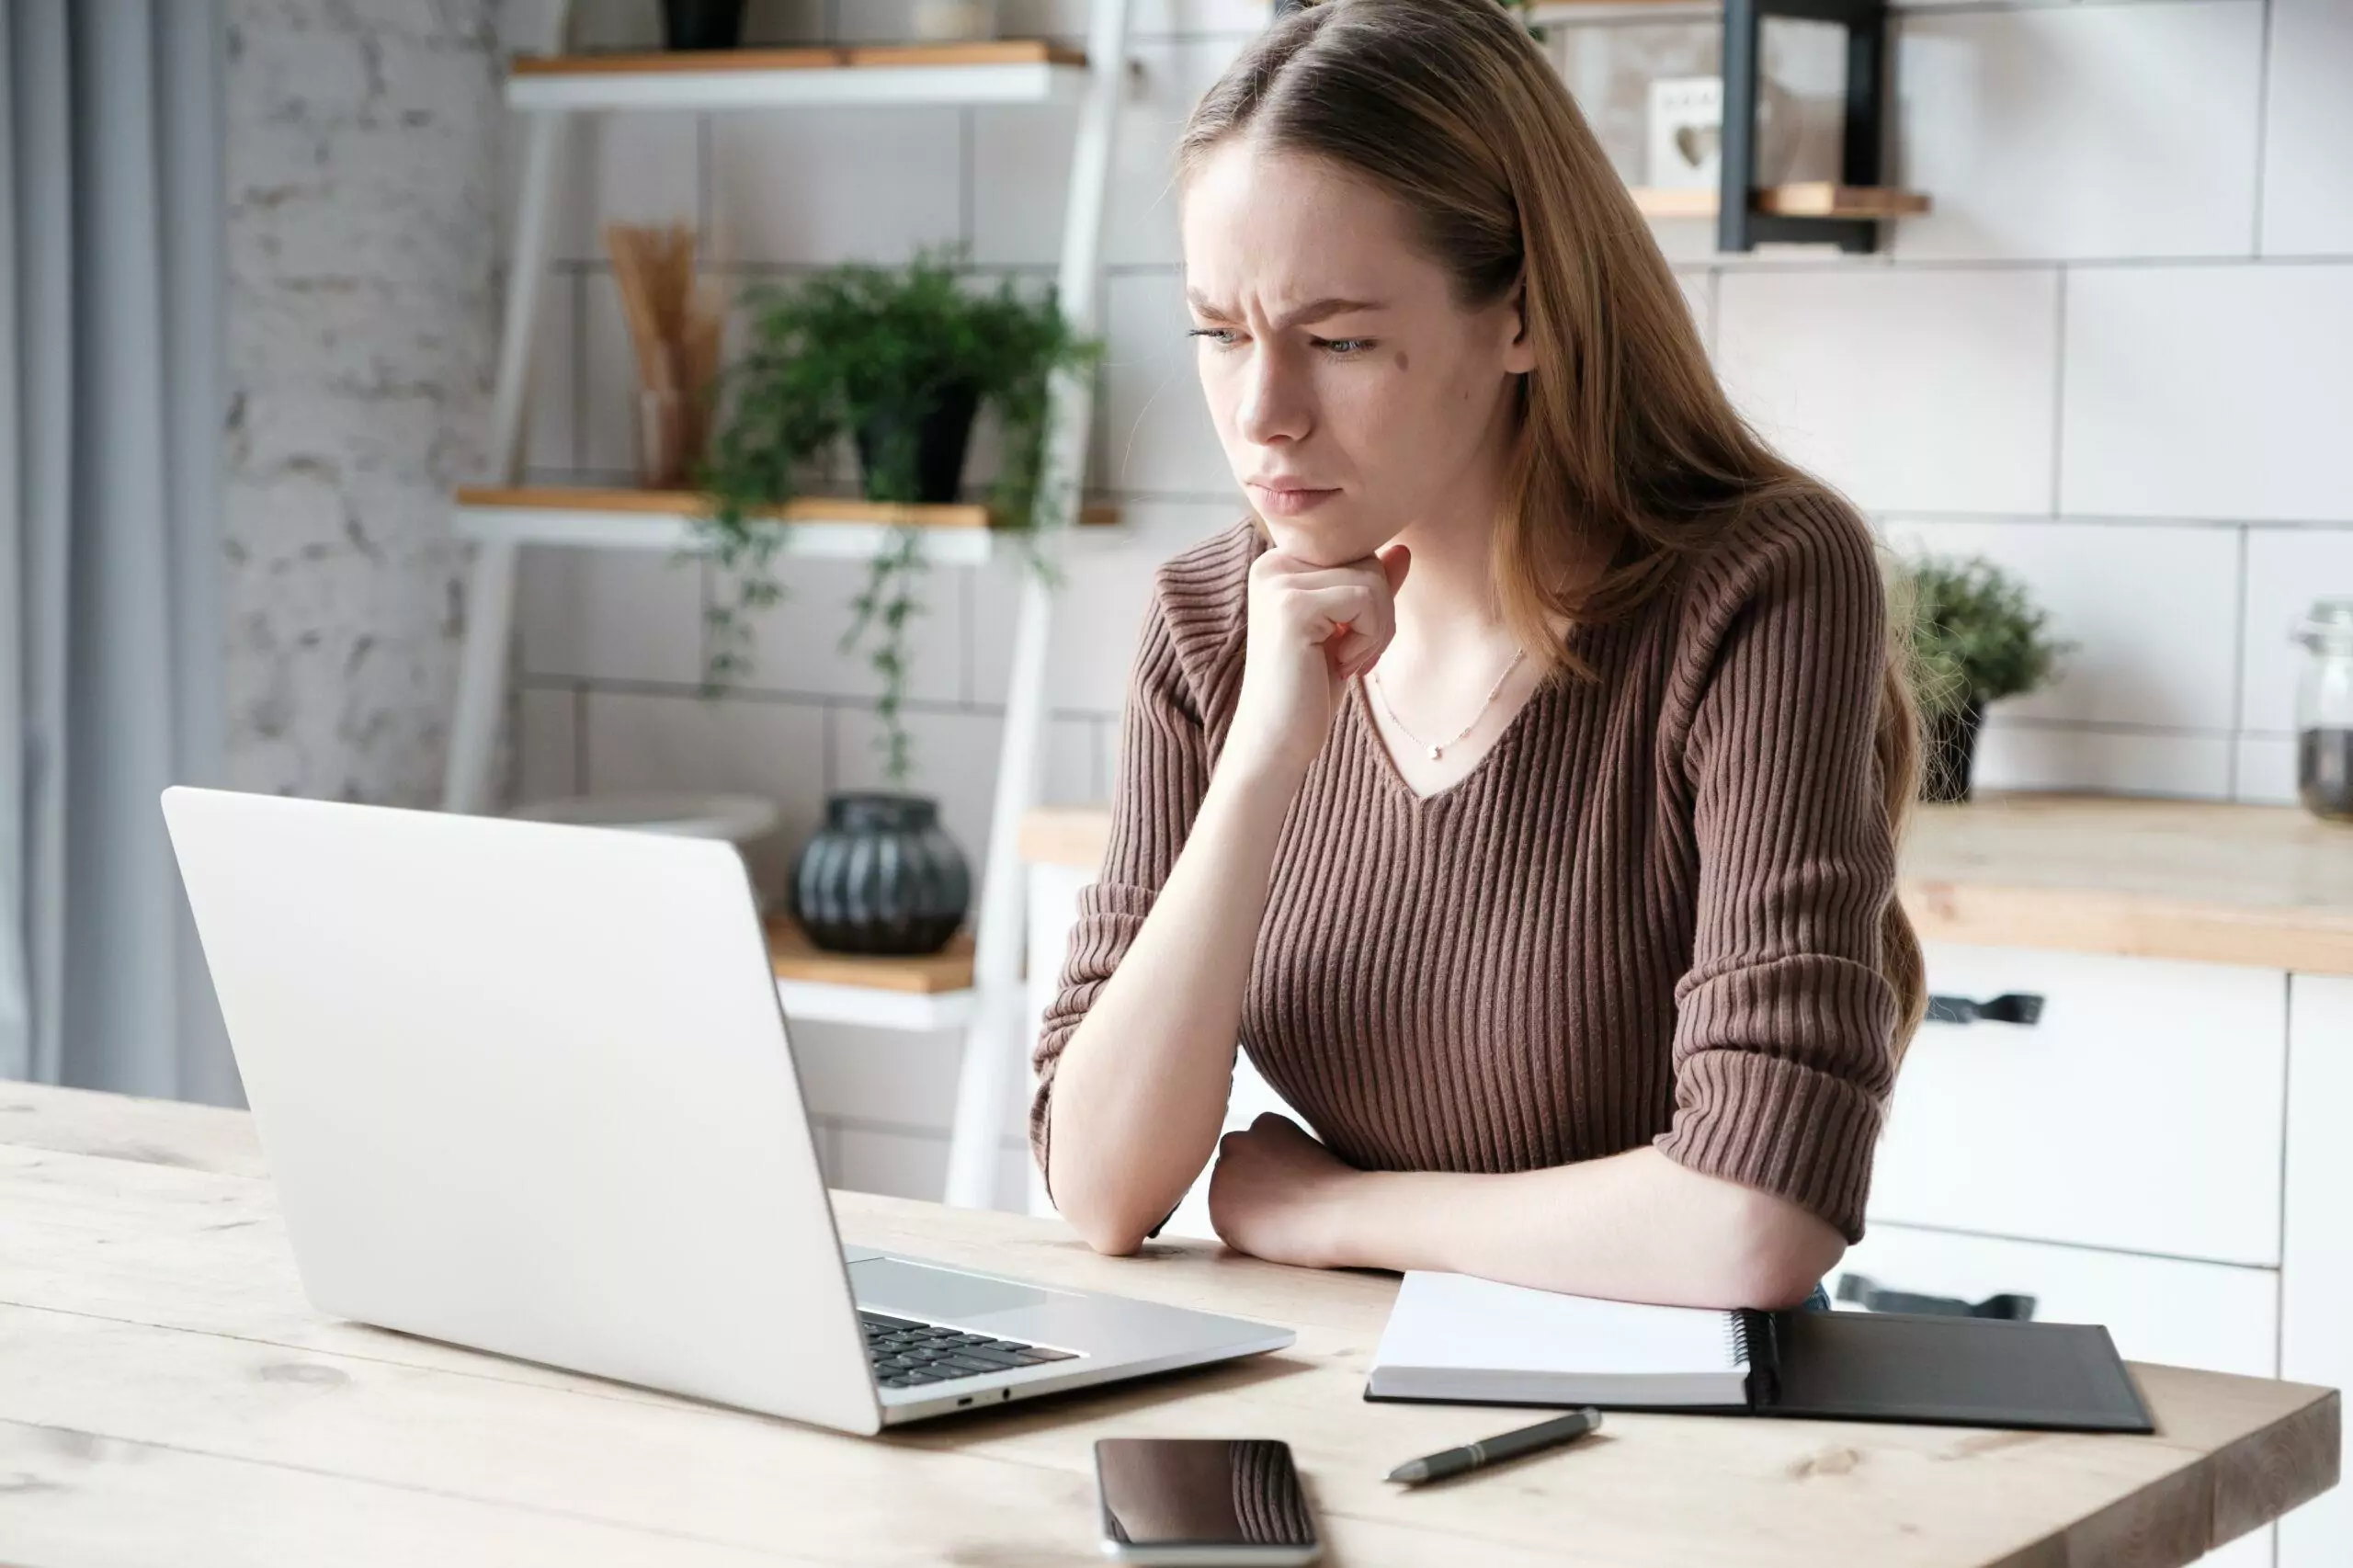 Serious caucasian young female remote worker in casual outfit sitting at table with smartphone and planner and looking pensively at laptop screen